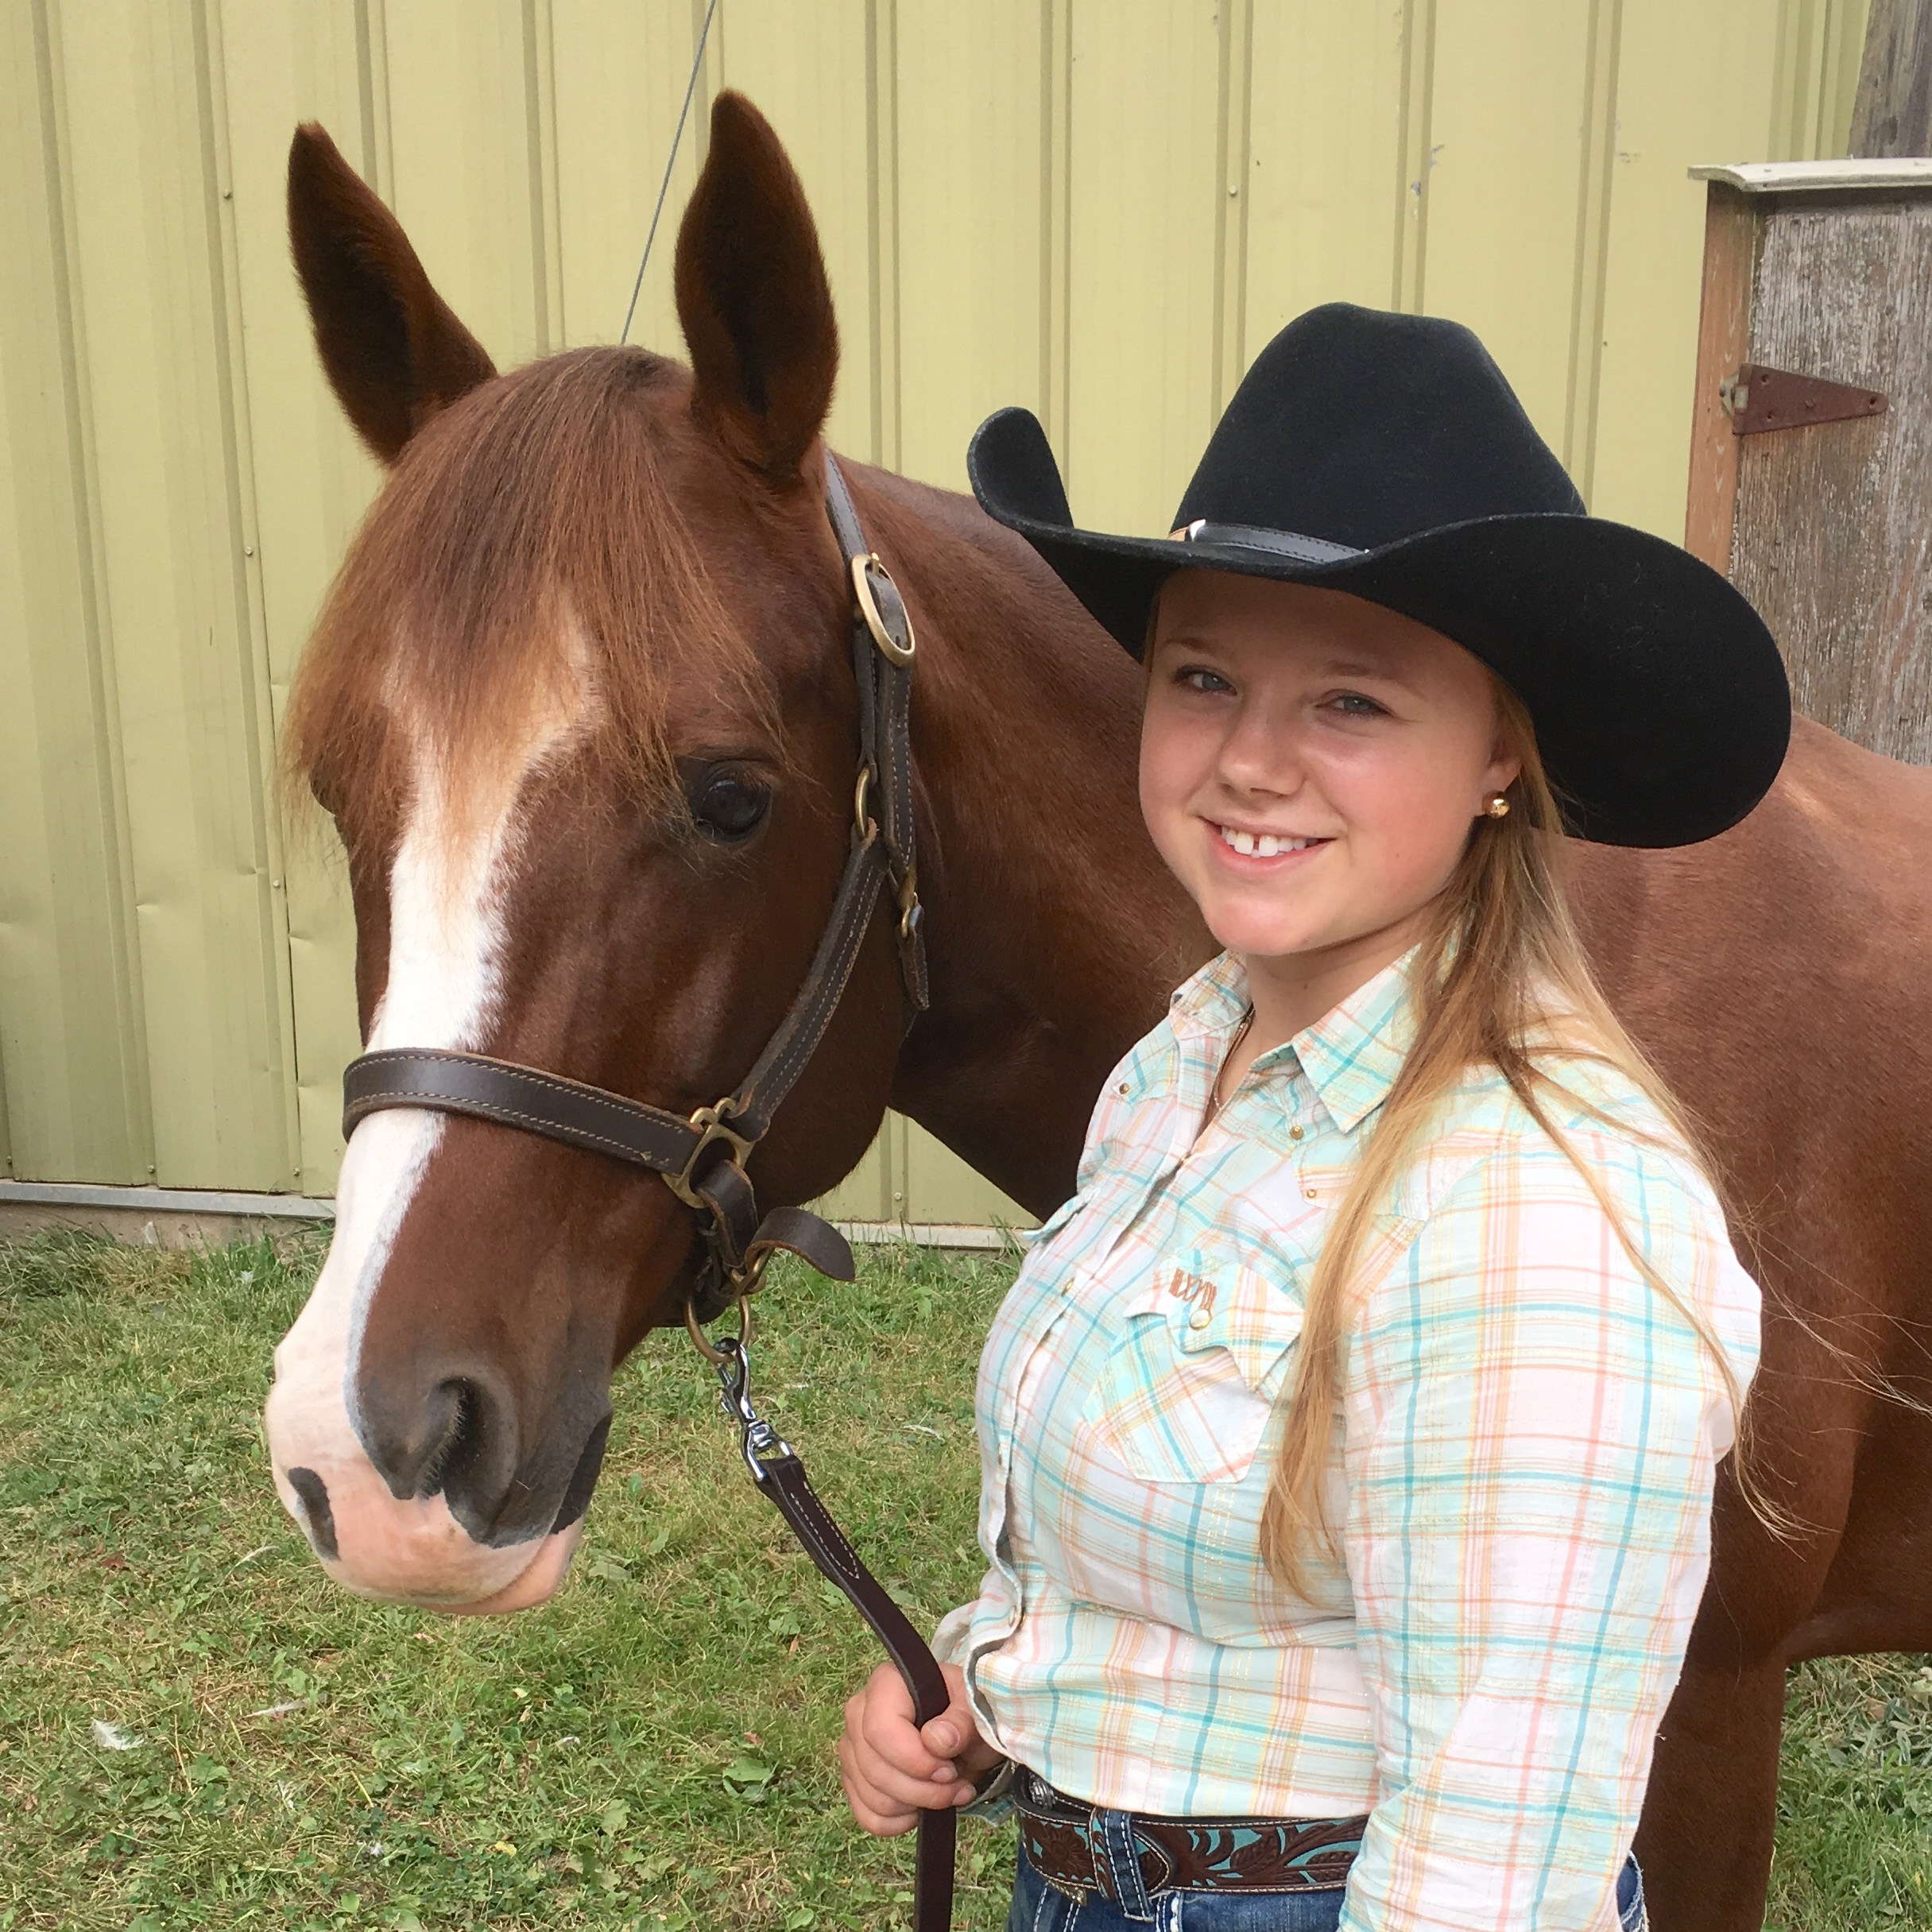 4-H raising confidence, building resilience